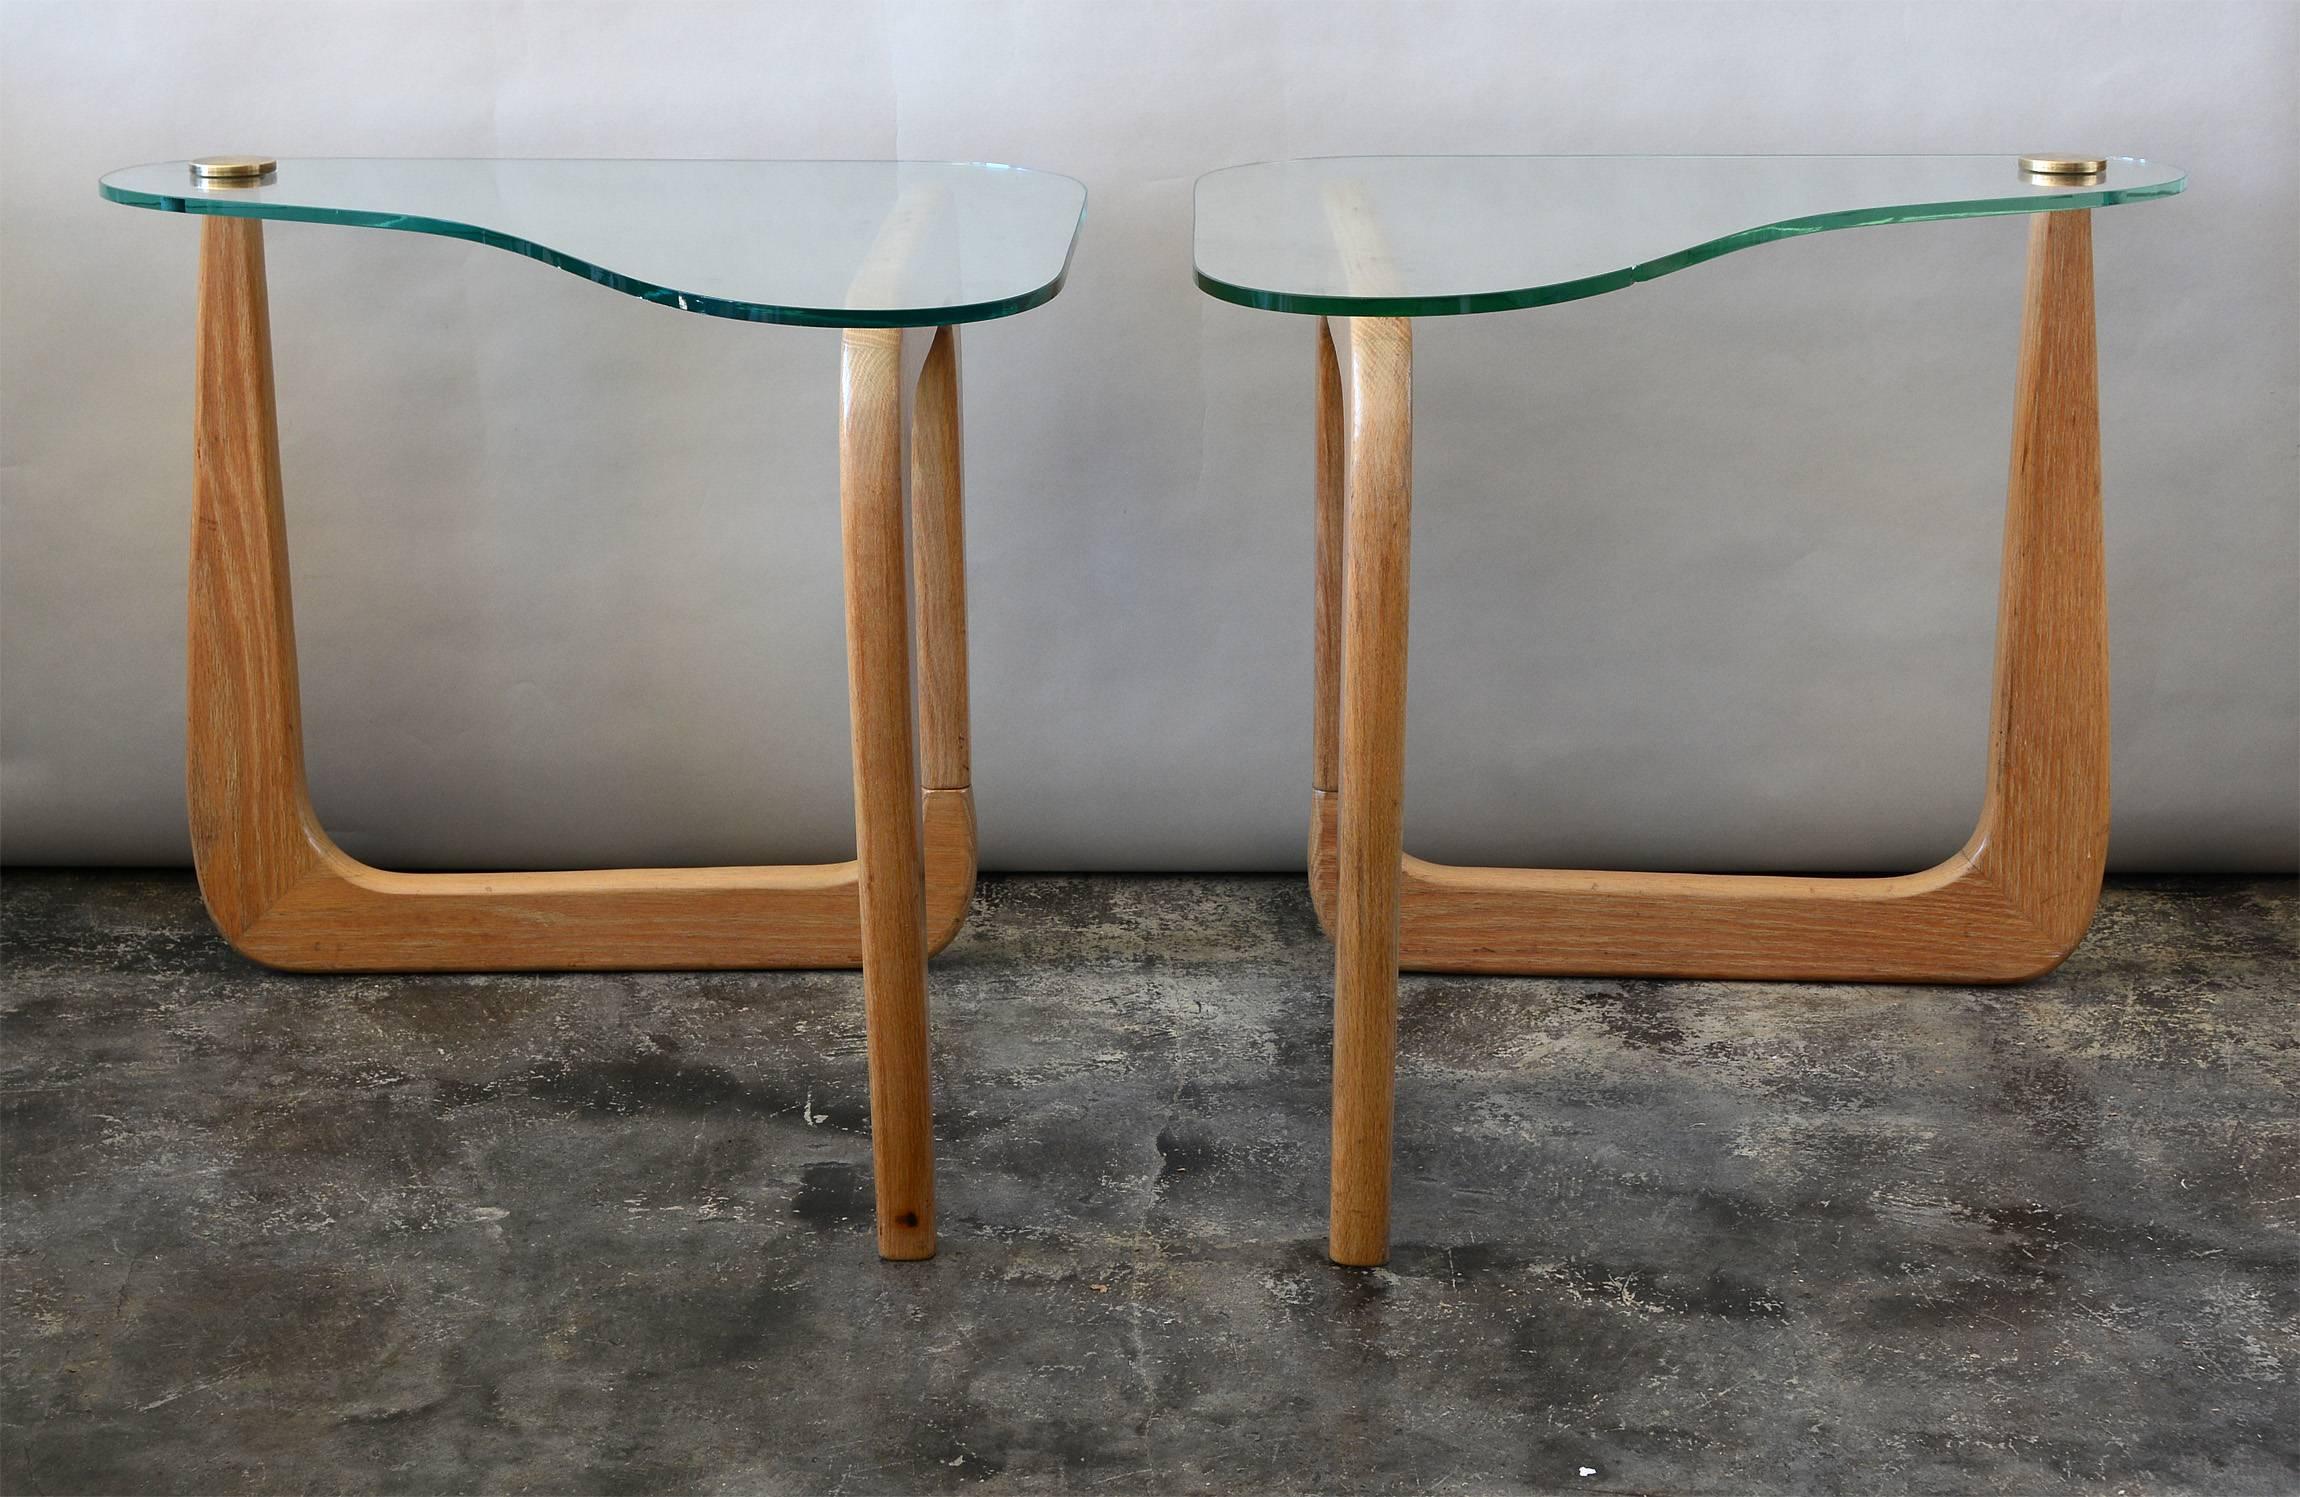 These biomorphic end tables have cerused oak bases and glass tops. A large brass disk holds the glass to one leg. There is some wear and discoloration in a few spots to the original finish. One top is the original pale green glass. There are two